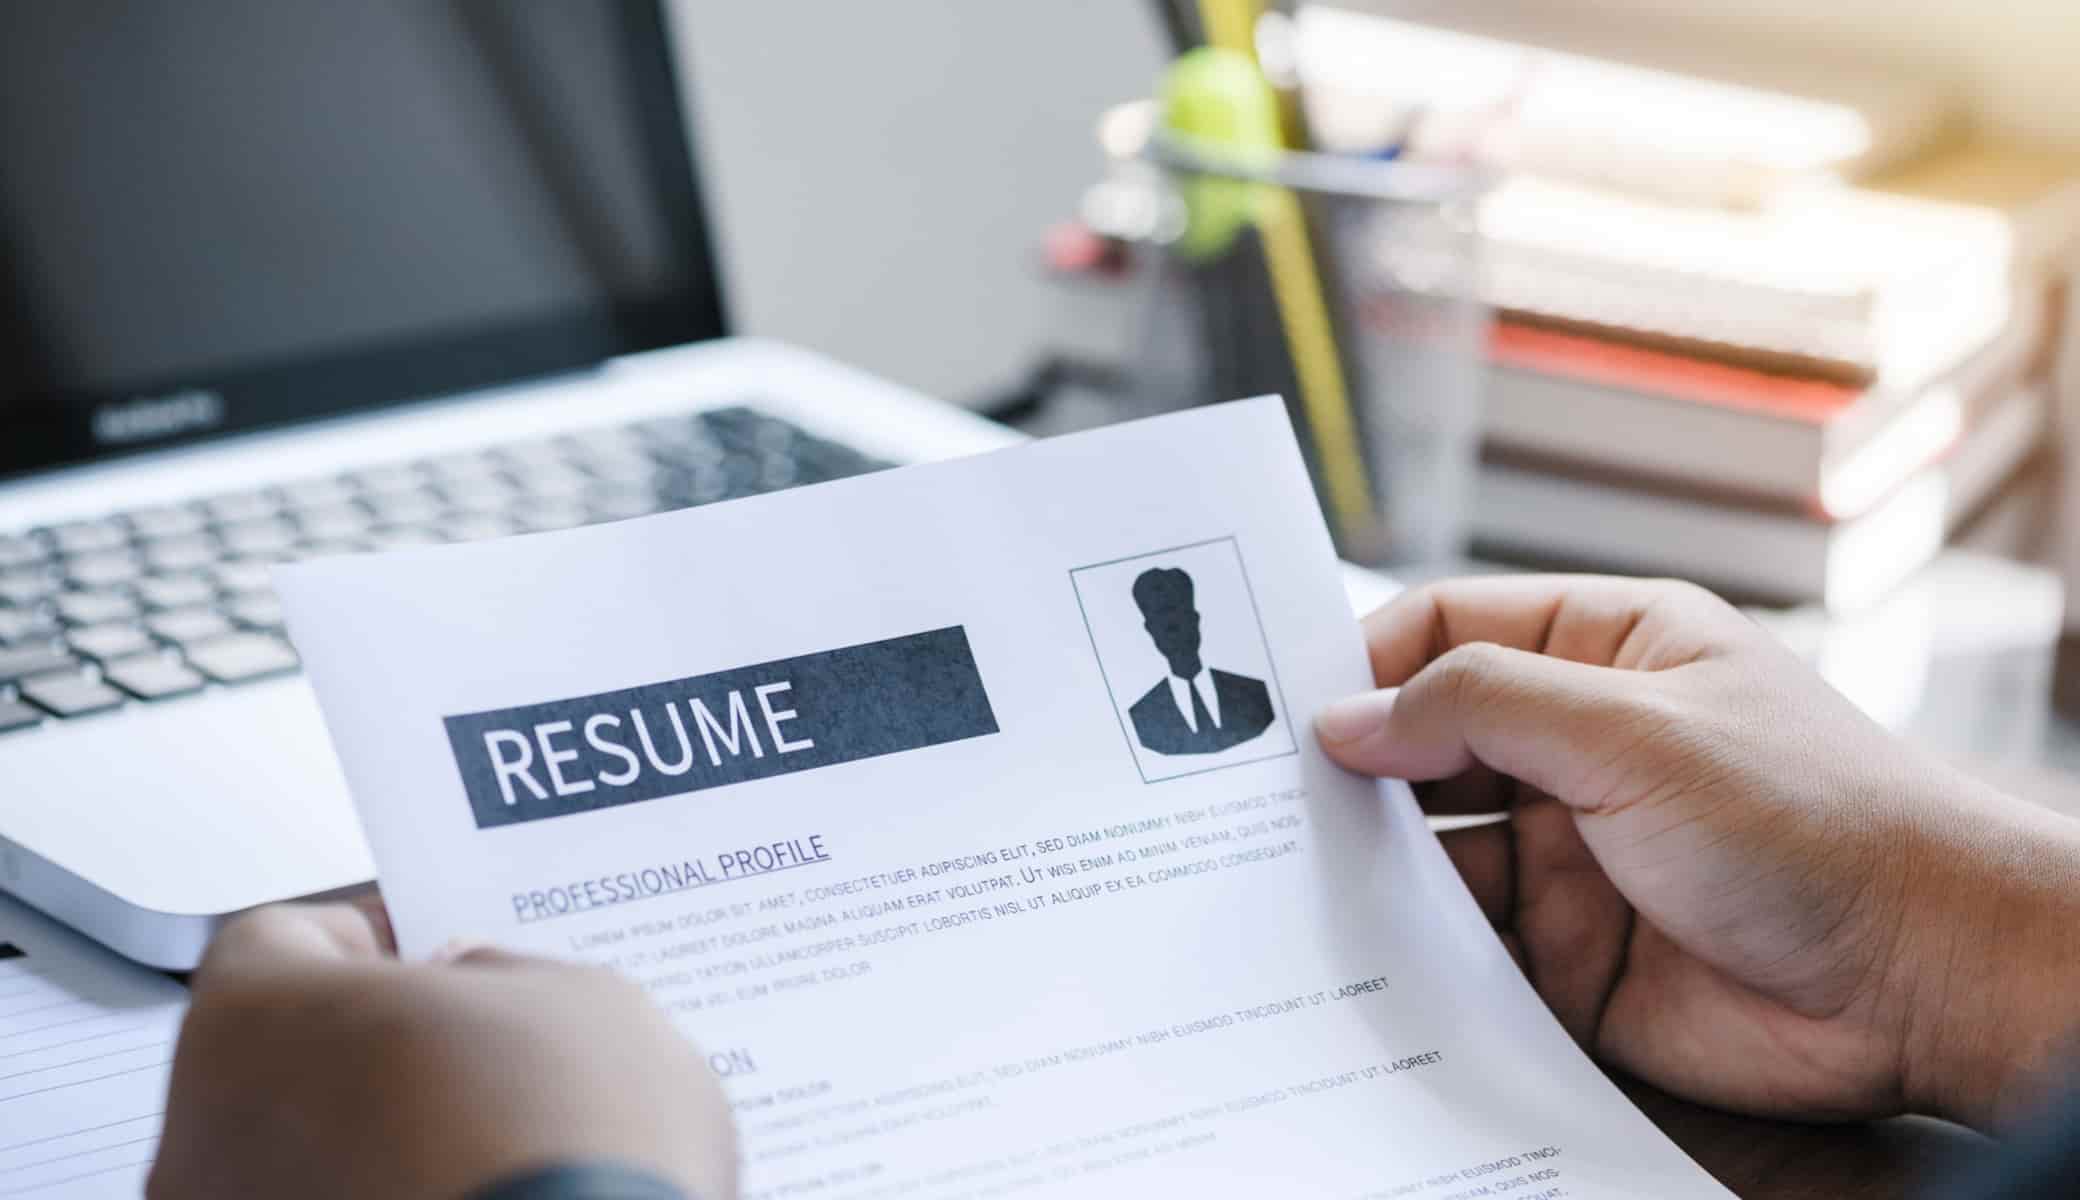 Job Resume Document Out From Laptop. Hands Holding Cv Resume Pap